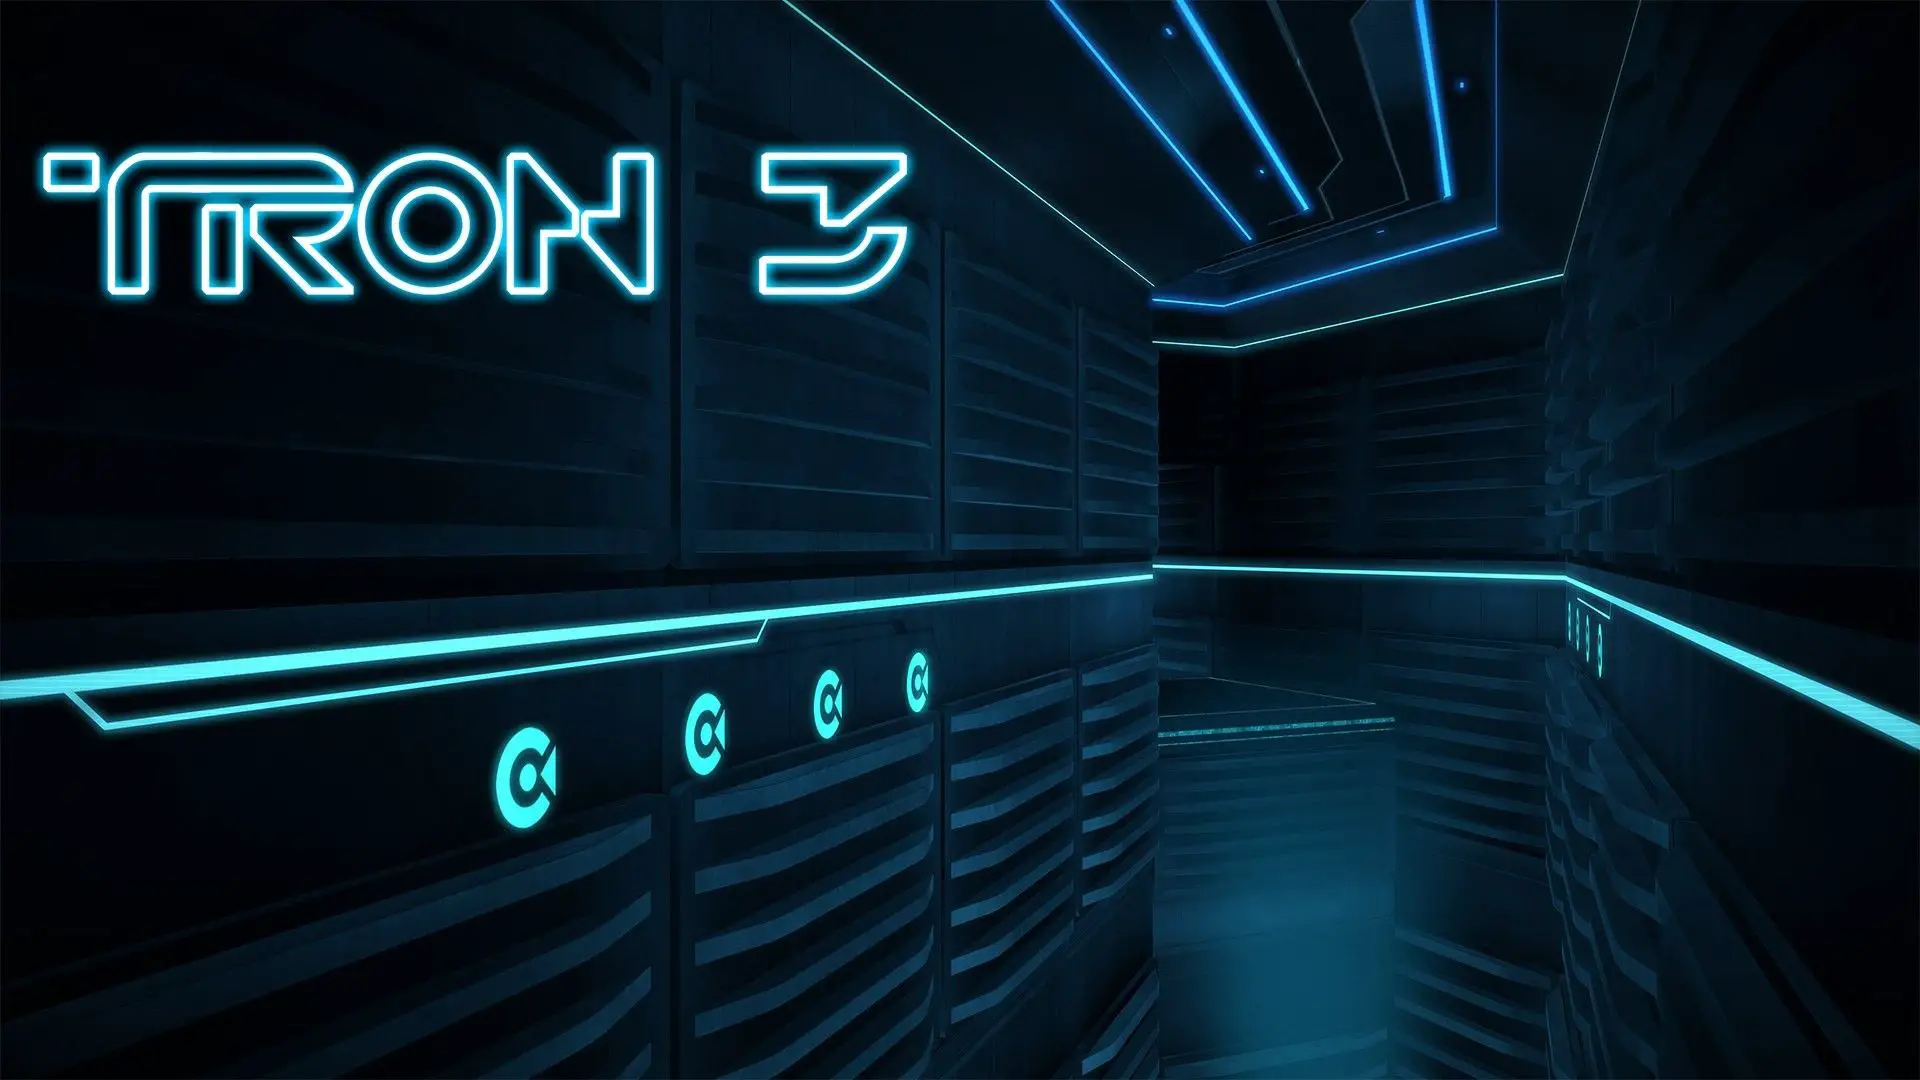 Production Begins On The Long-Awaited Third ‘Tron’ Film